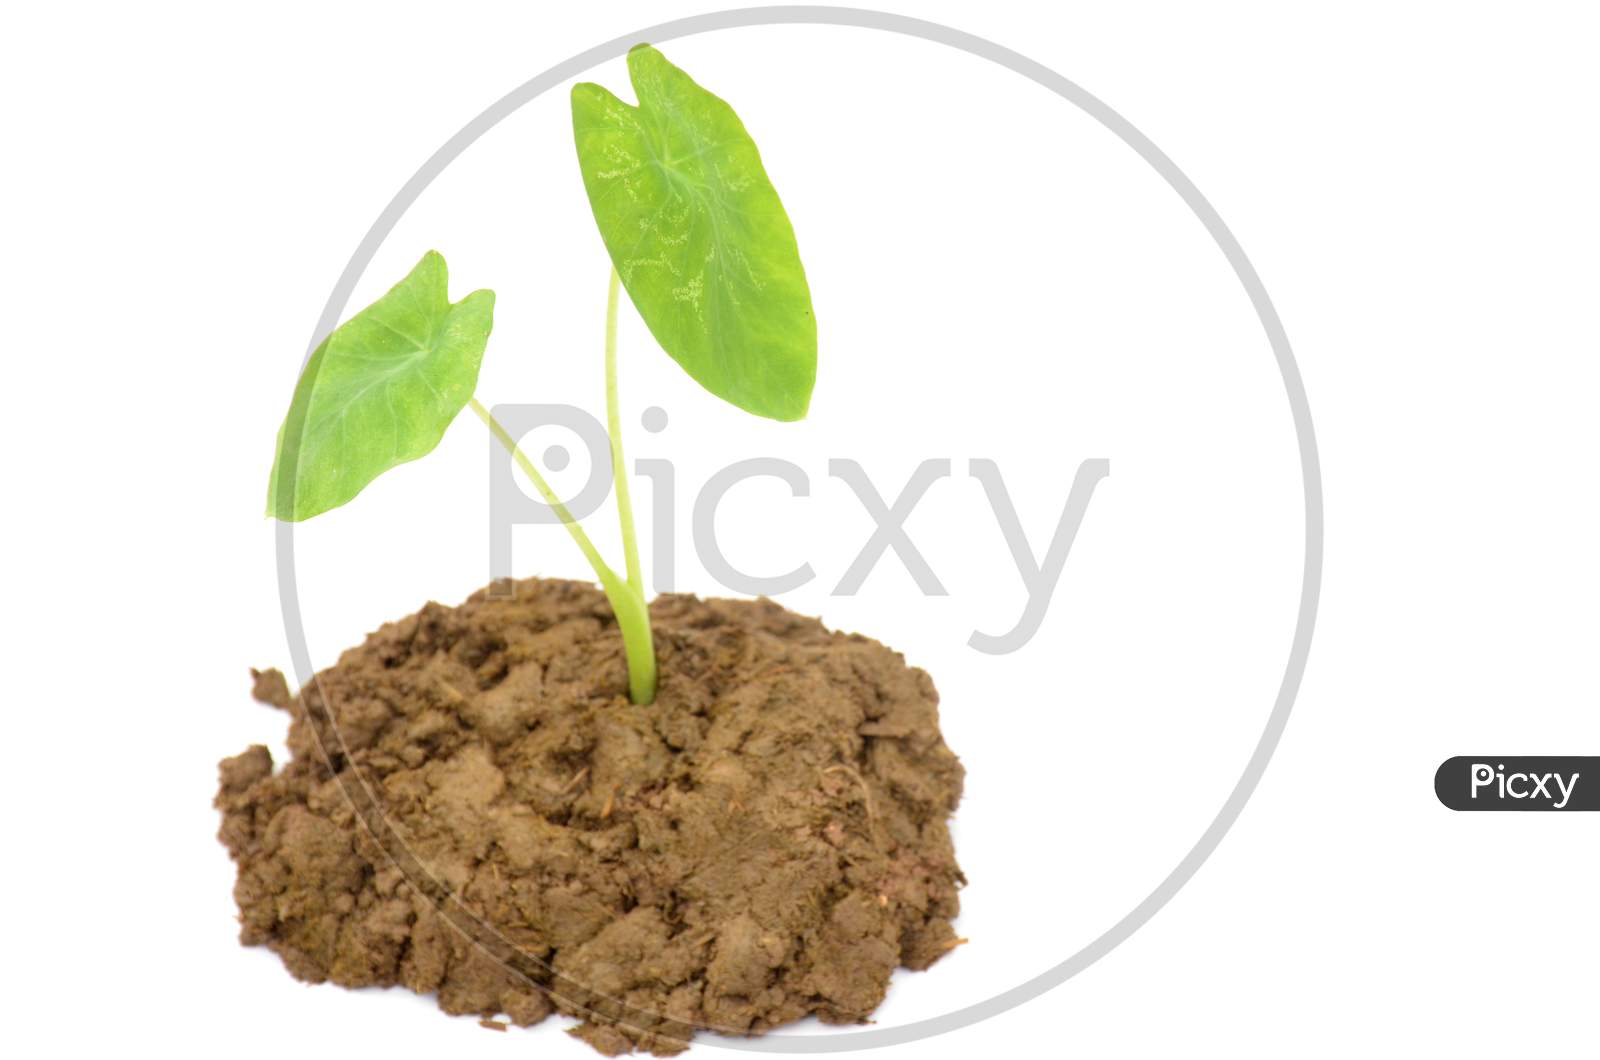 the small green arbic plant seedlings isolated on white background.